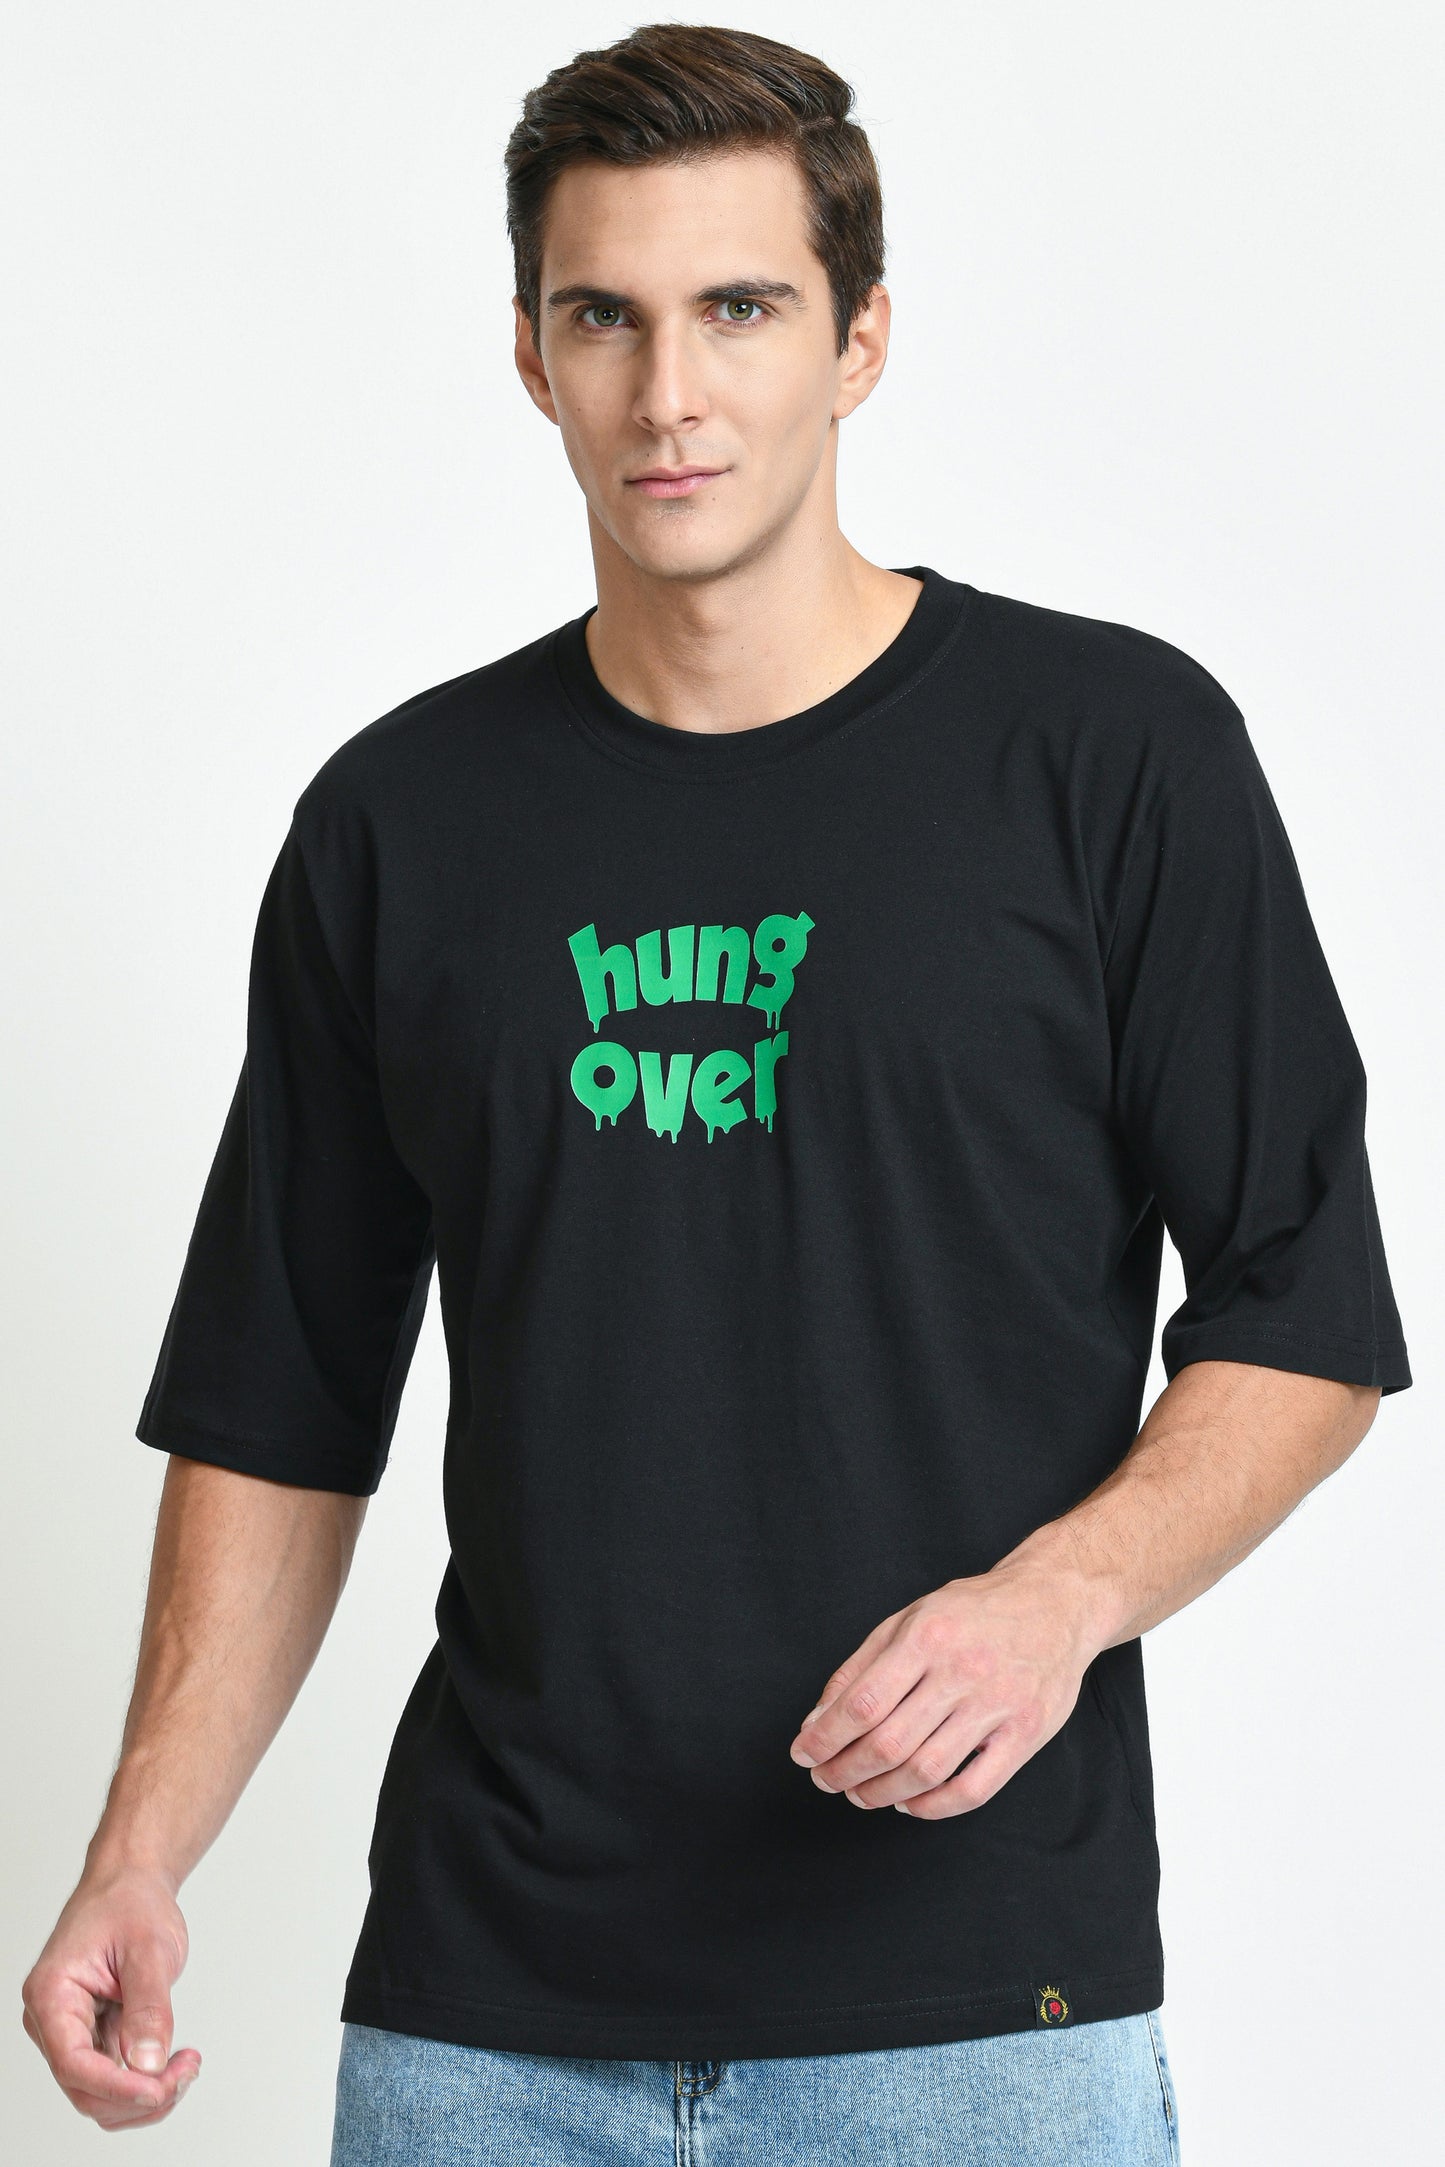 HUNG OVER PRINTED OVERSIZED T-SHIRT